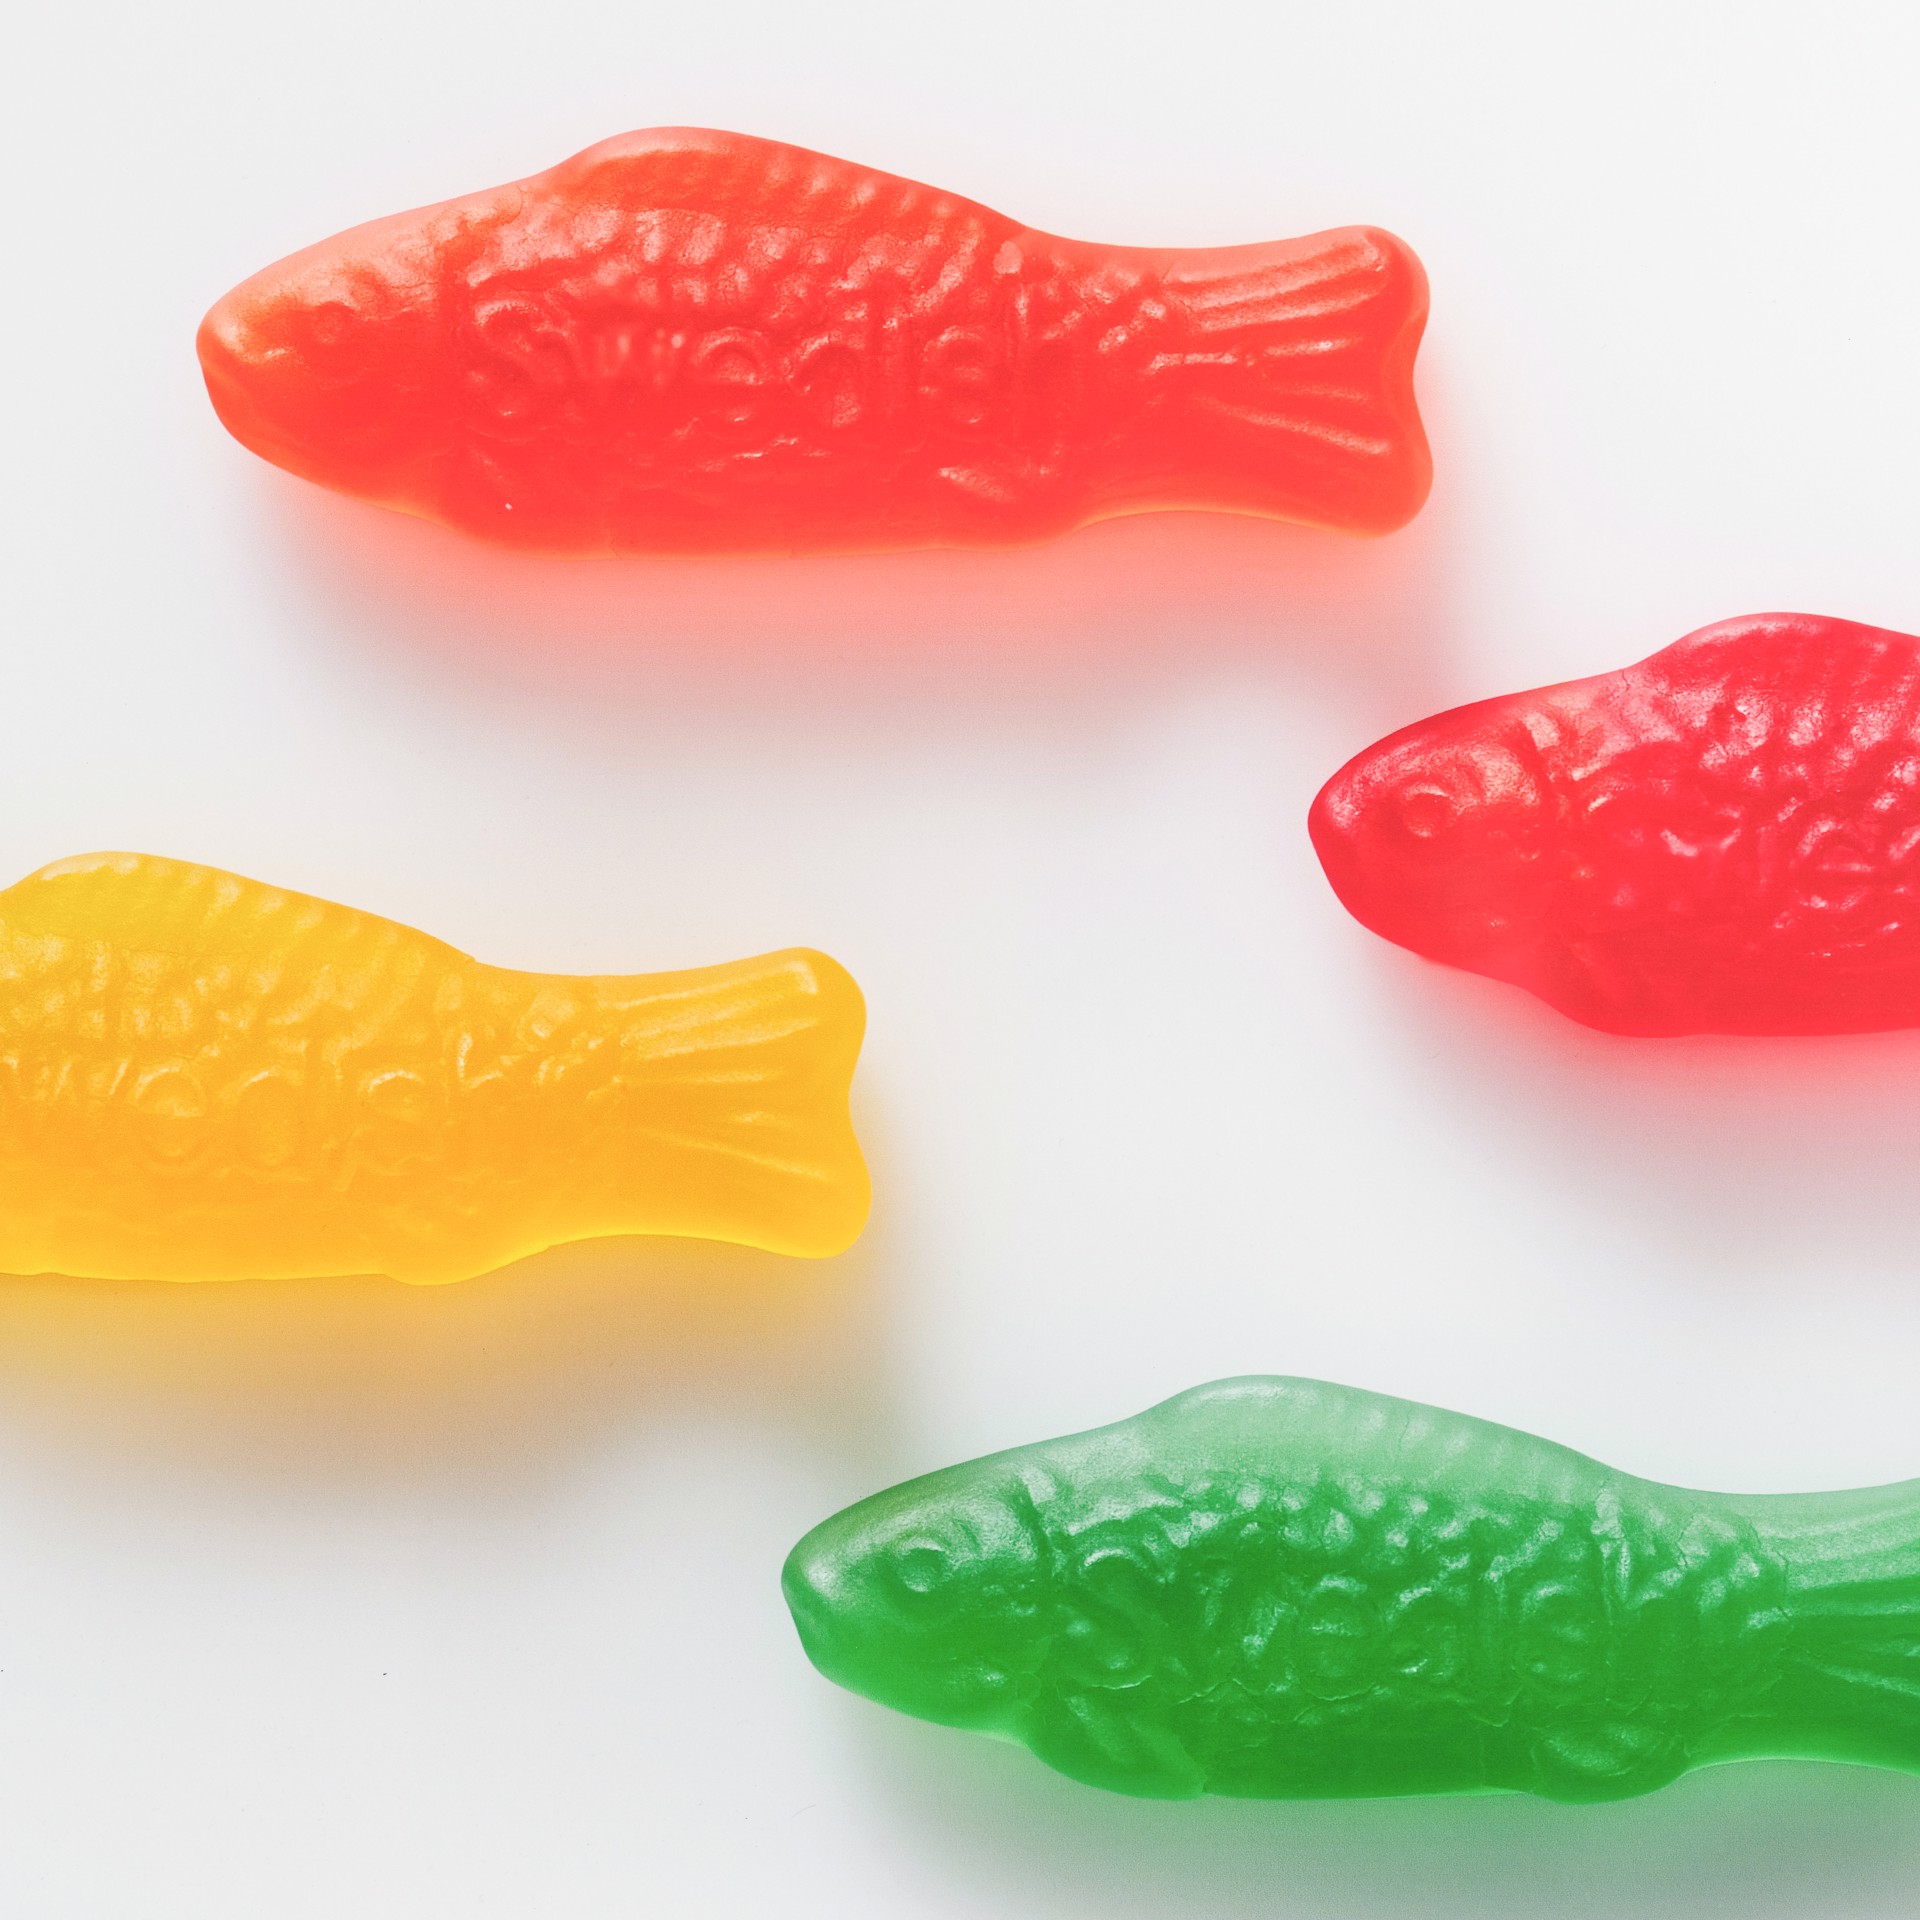 Swedish Fish by Peter Andrew Lusztyk / Refined Sugar